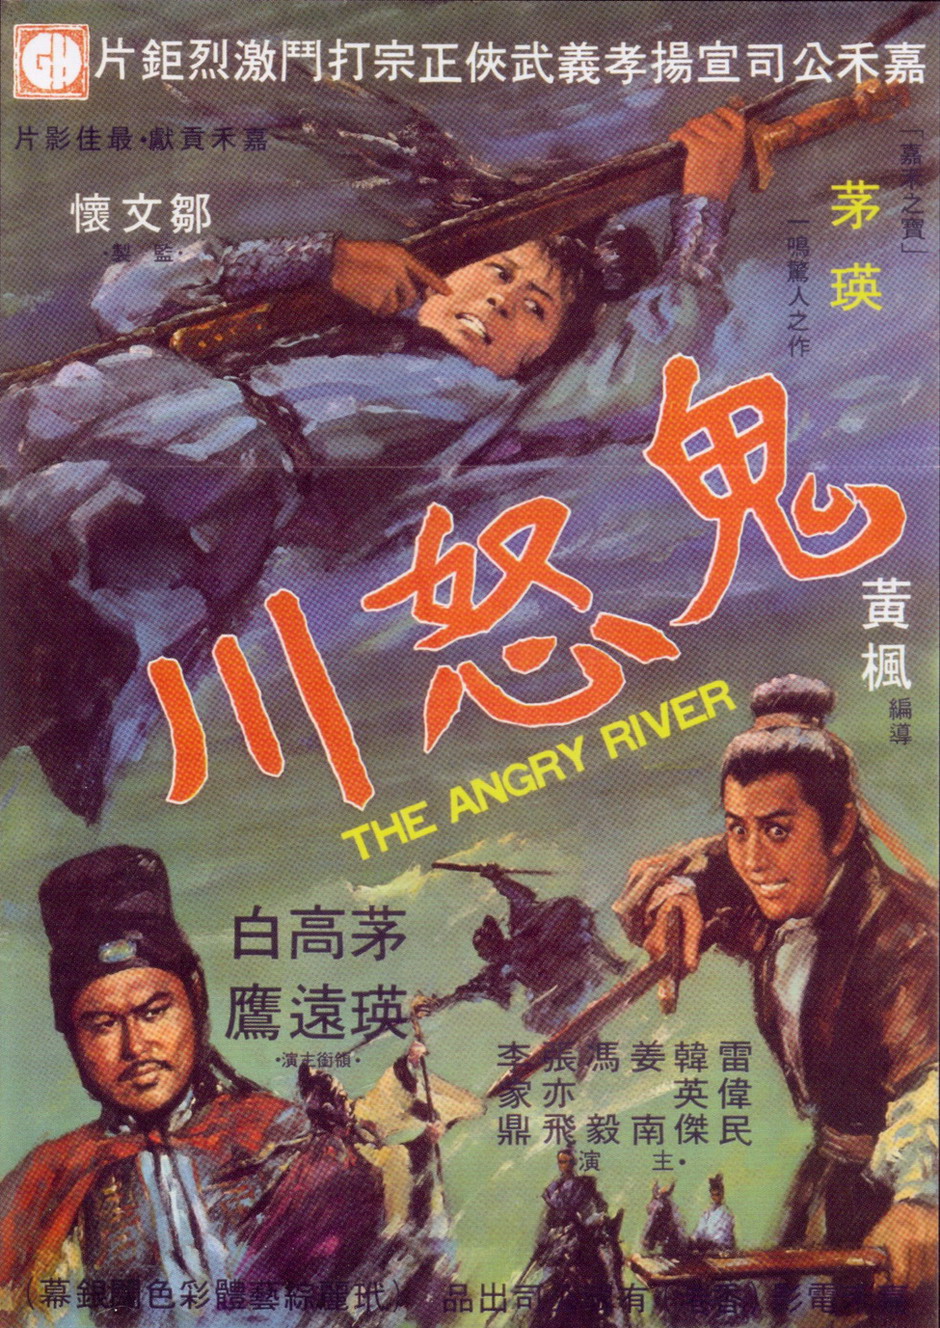 affiche du film The Angry River